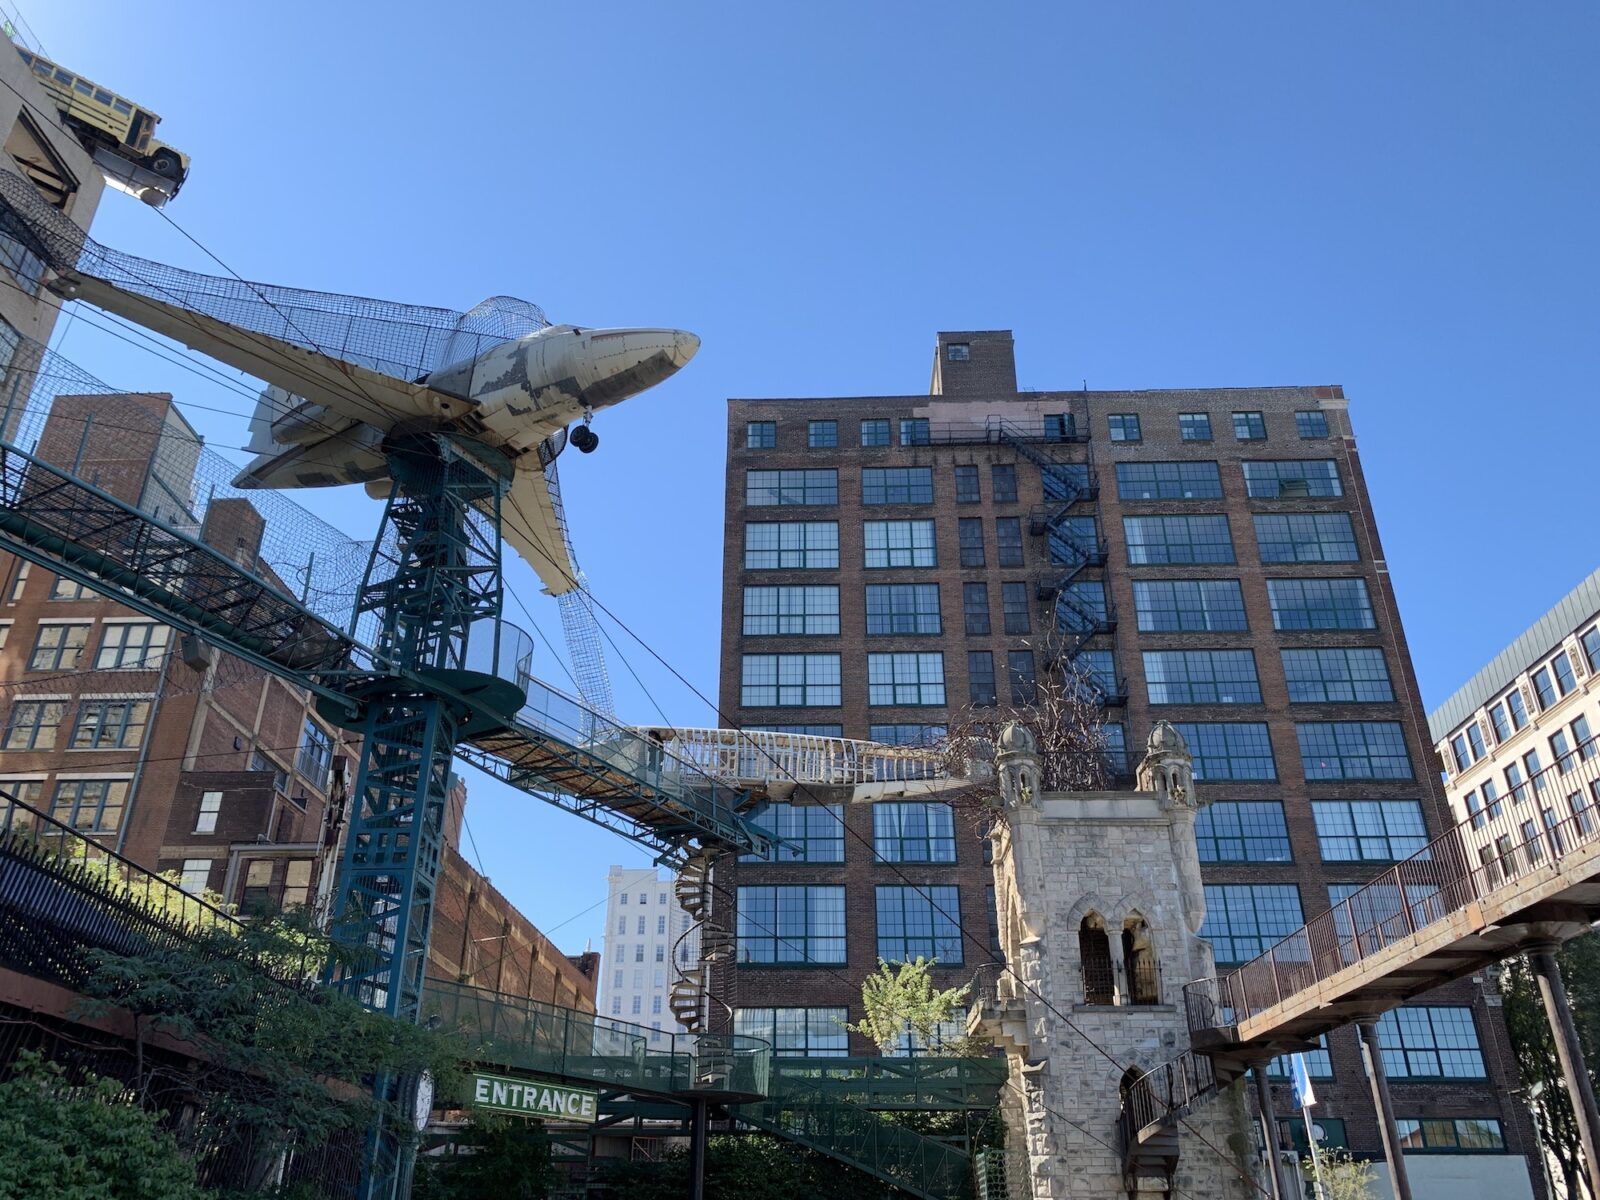 City museum in downtown St. Louis